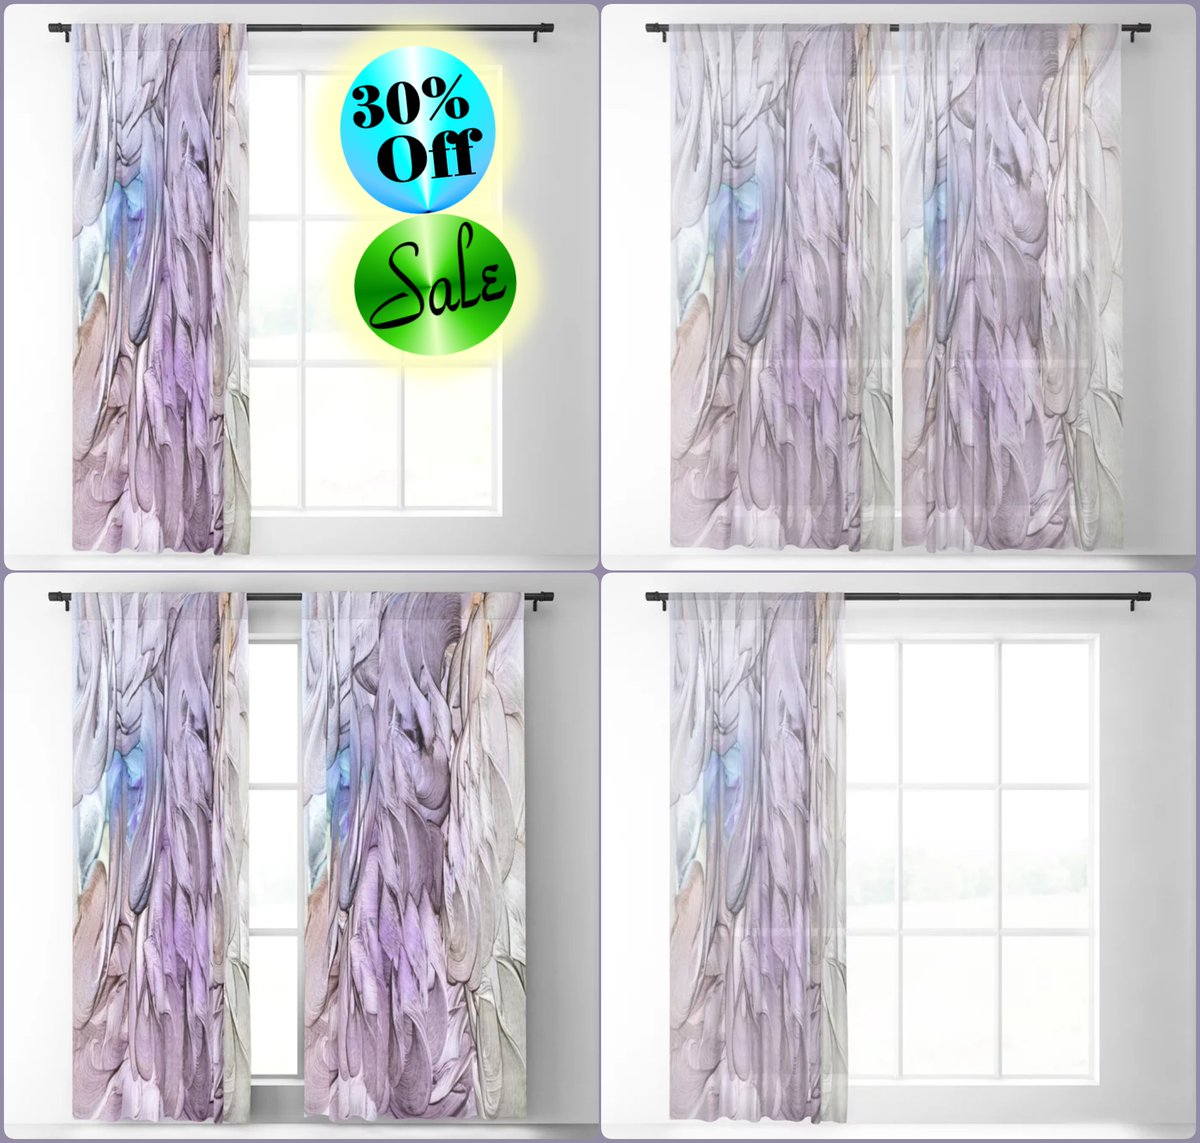 *SALE 30% Off*
The Personification of Day Blackout & Sheer Curtain~by Art_Falaxy~
~Refreshingly Unique~
#artfalaxy #art #homedecor #society6 #gifts #bedroom #pillows #accessories #accents #interior #rugs
#tapestries #murals #sheercurtains #blackoutcurtains